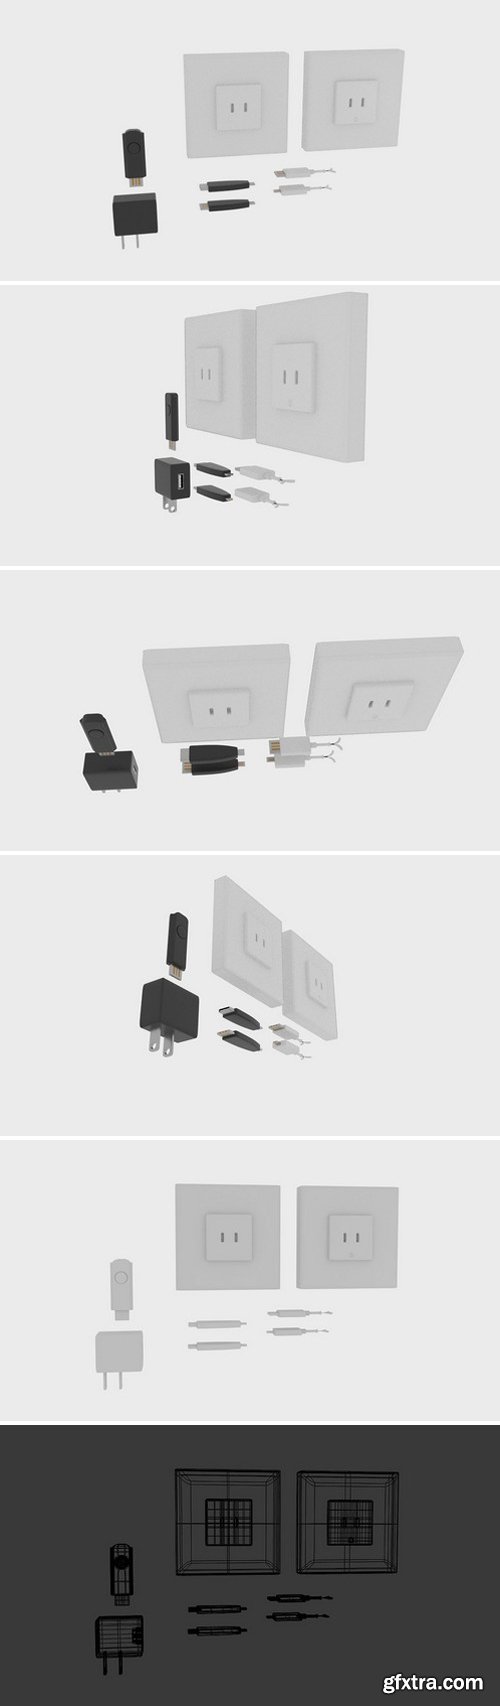 CM - USB Charger Component 1580113